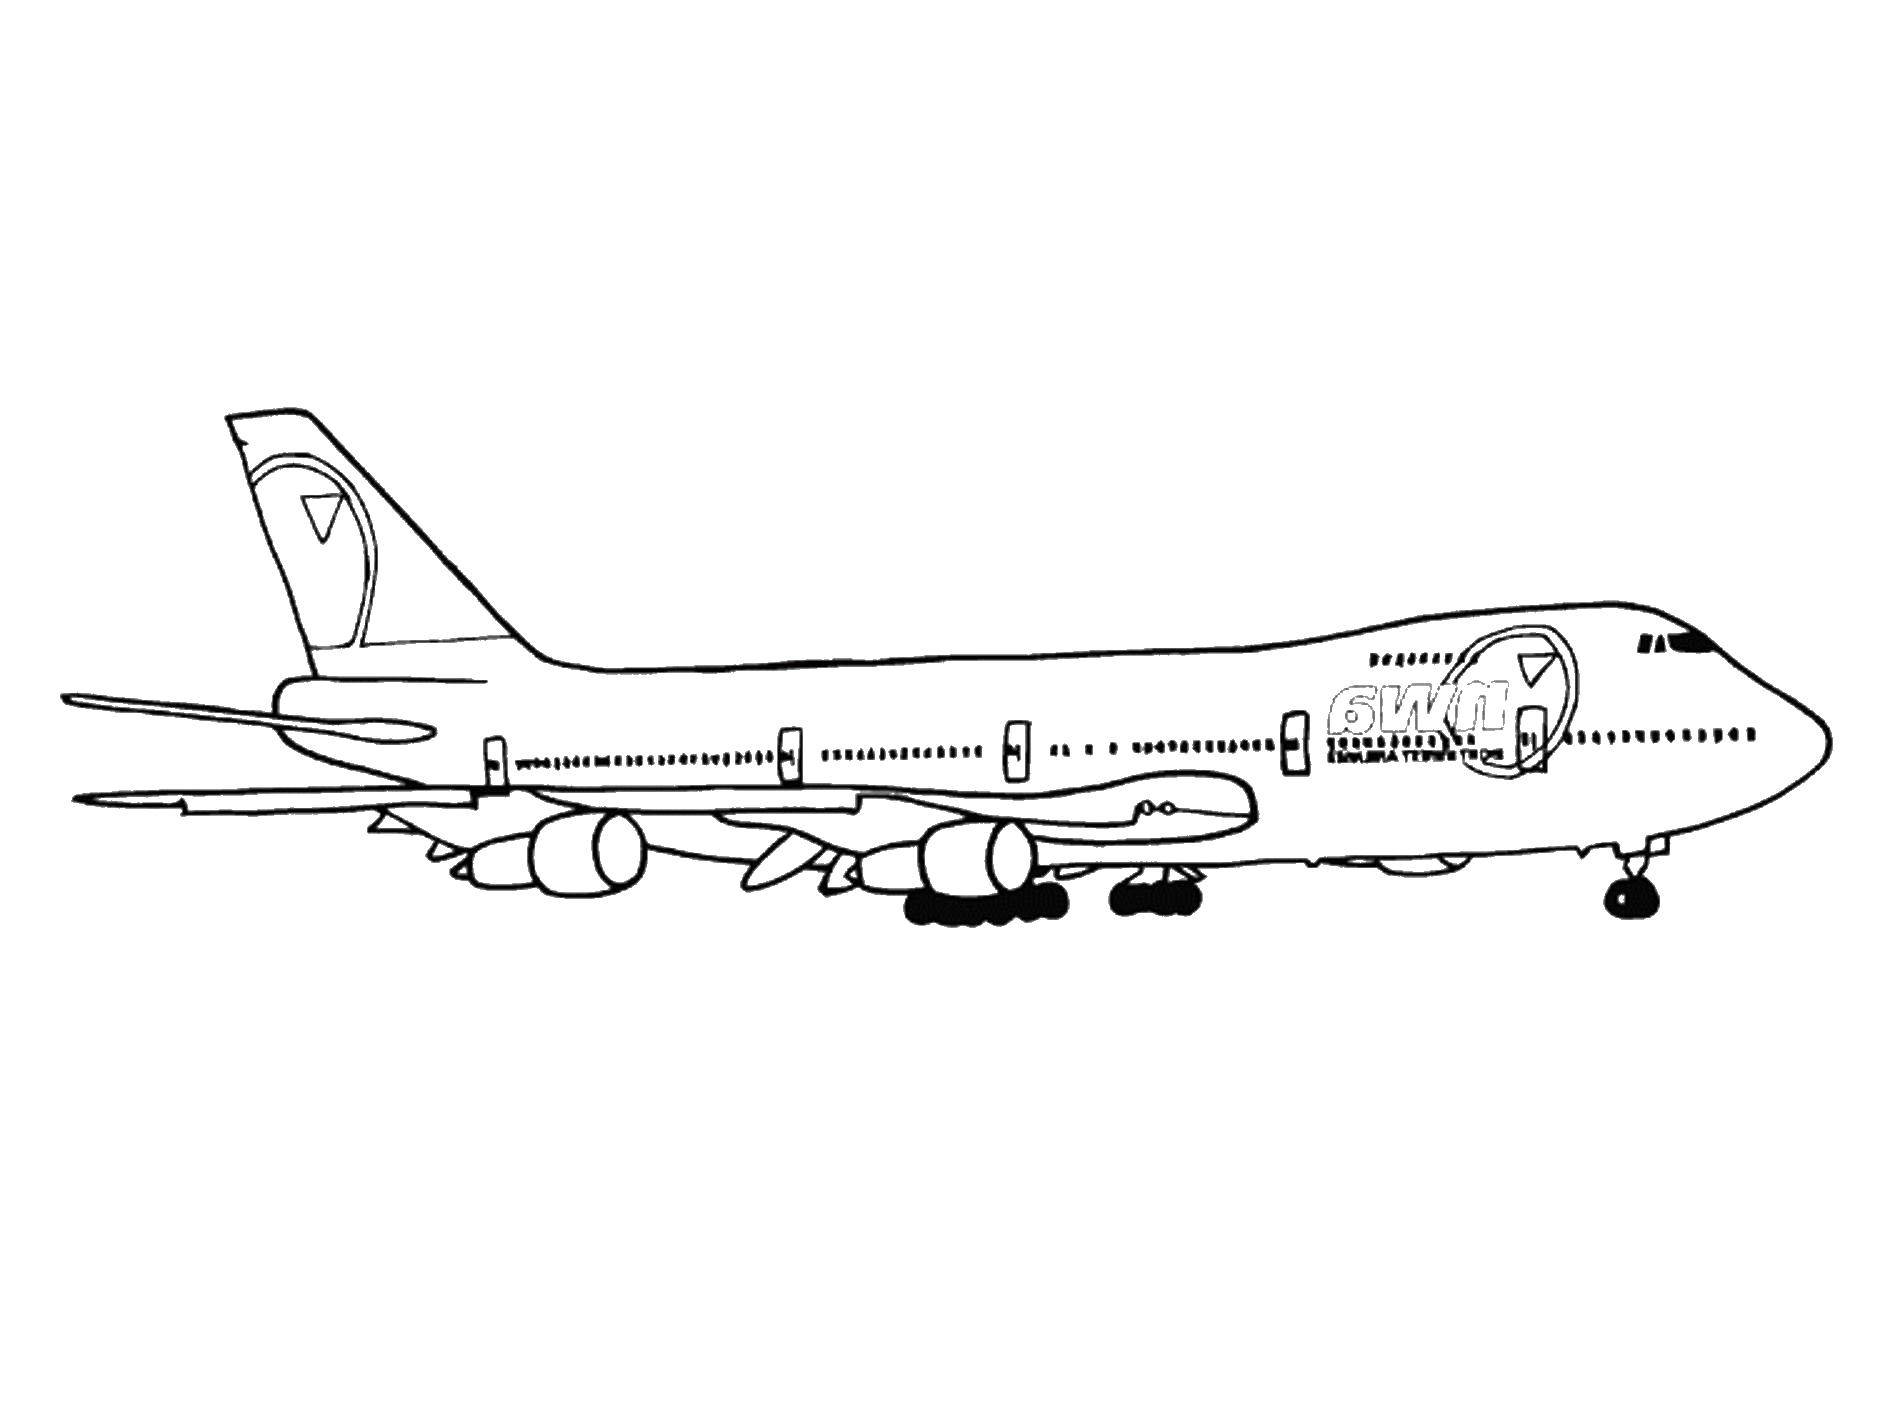 Coloring The plane. Category the planes. Tags:  aircraft, airplane, passenger plane.